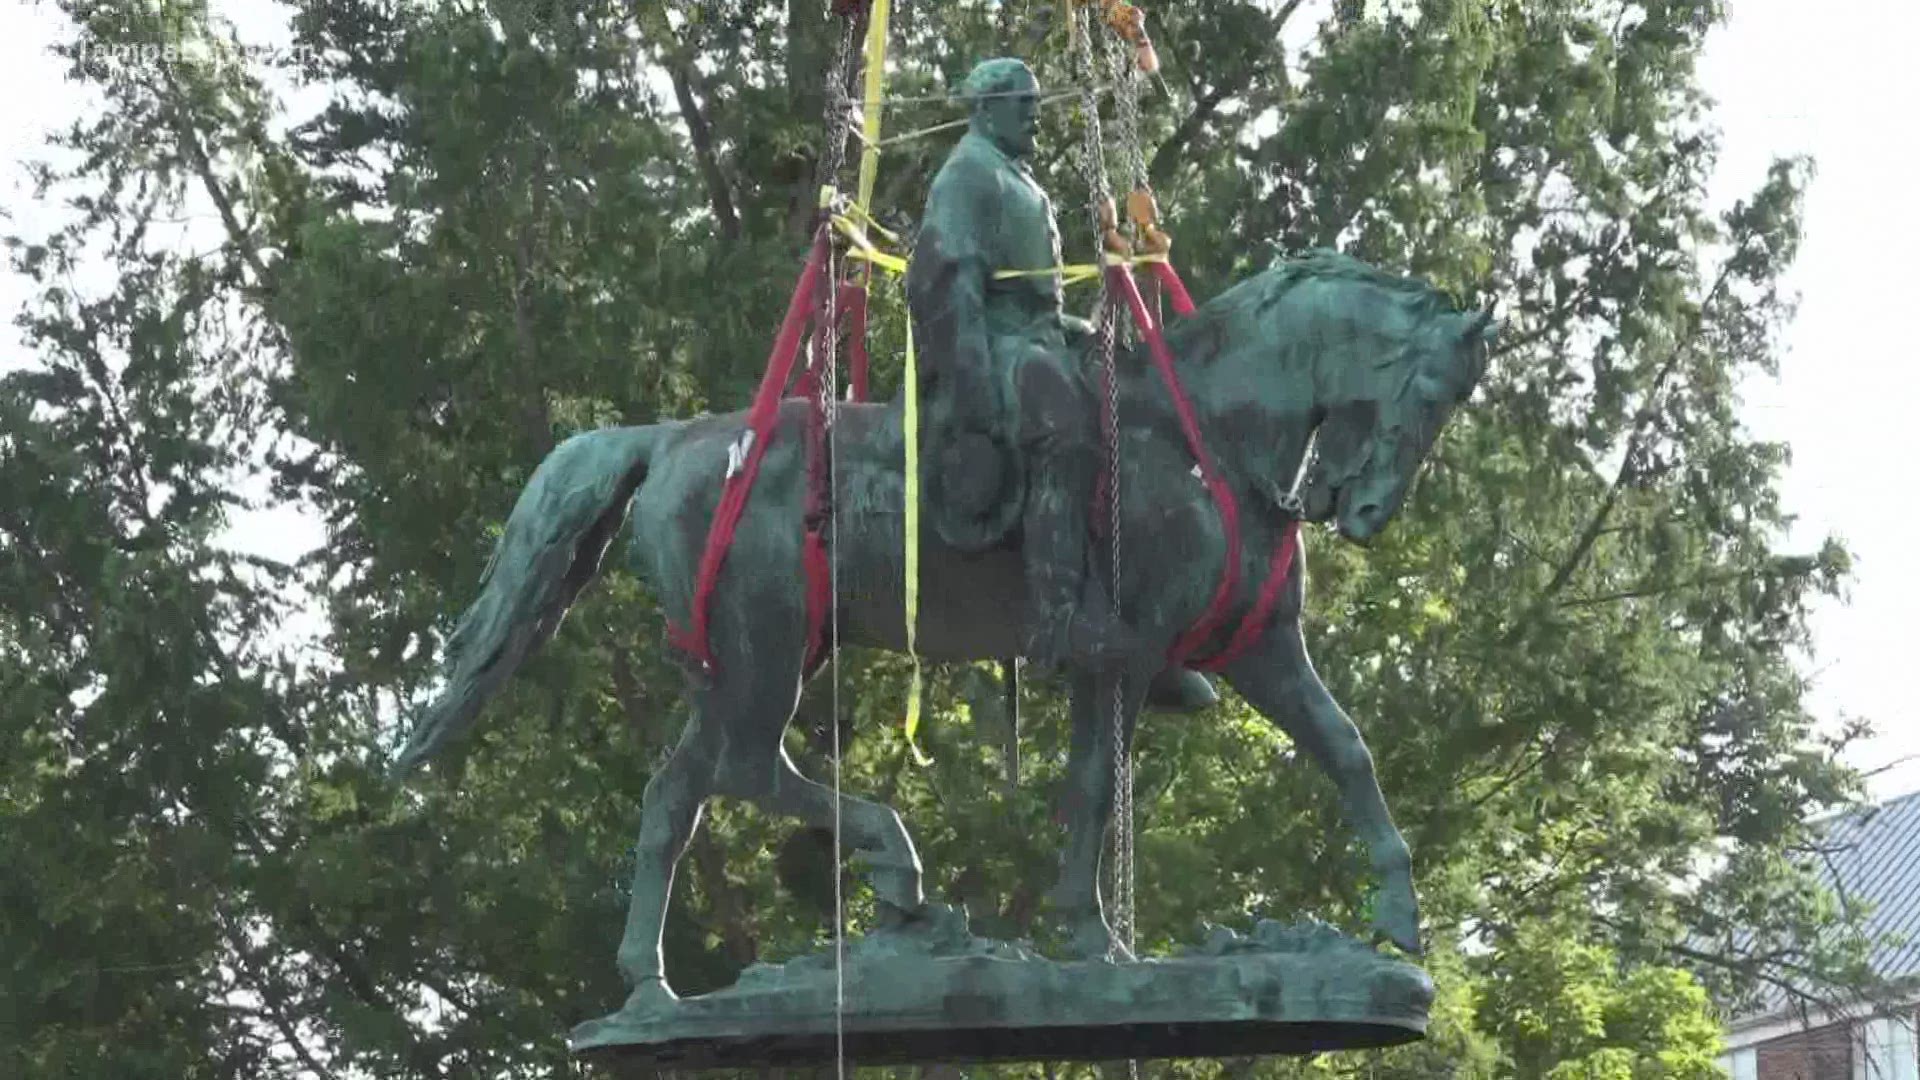 A Confederate monument that helped spark a violent white supremacist rally in Charlottesville, Virginia, has been hoisted off its stone pedestal.